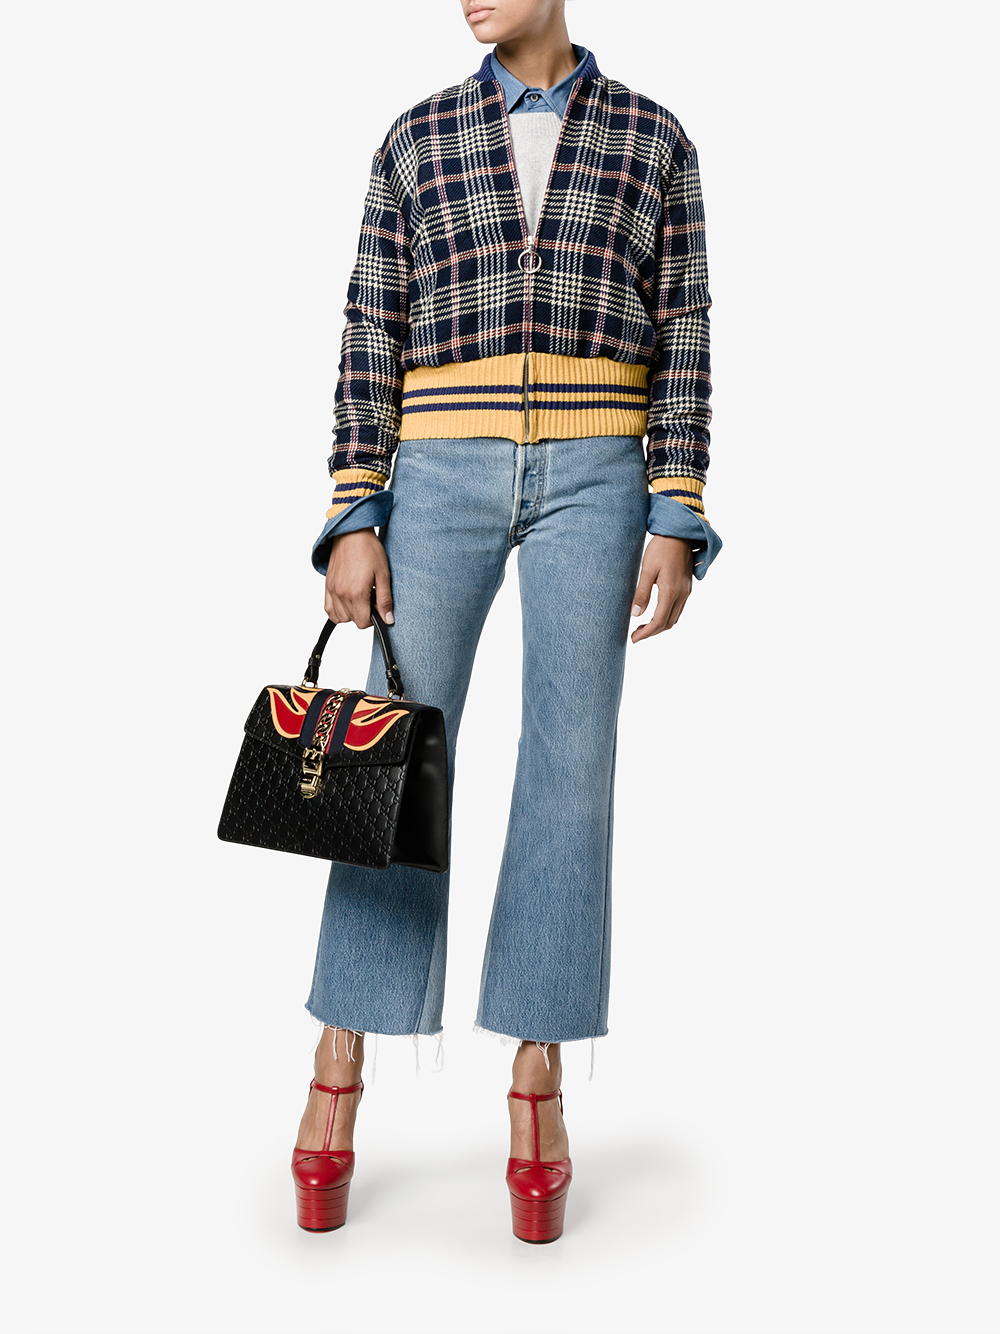 Gucci Sylvie Bag With Flames | Lyst